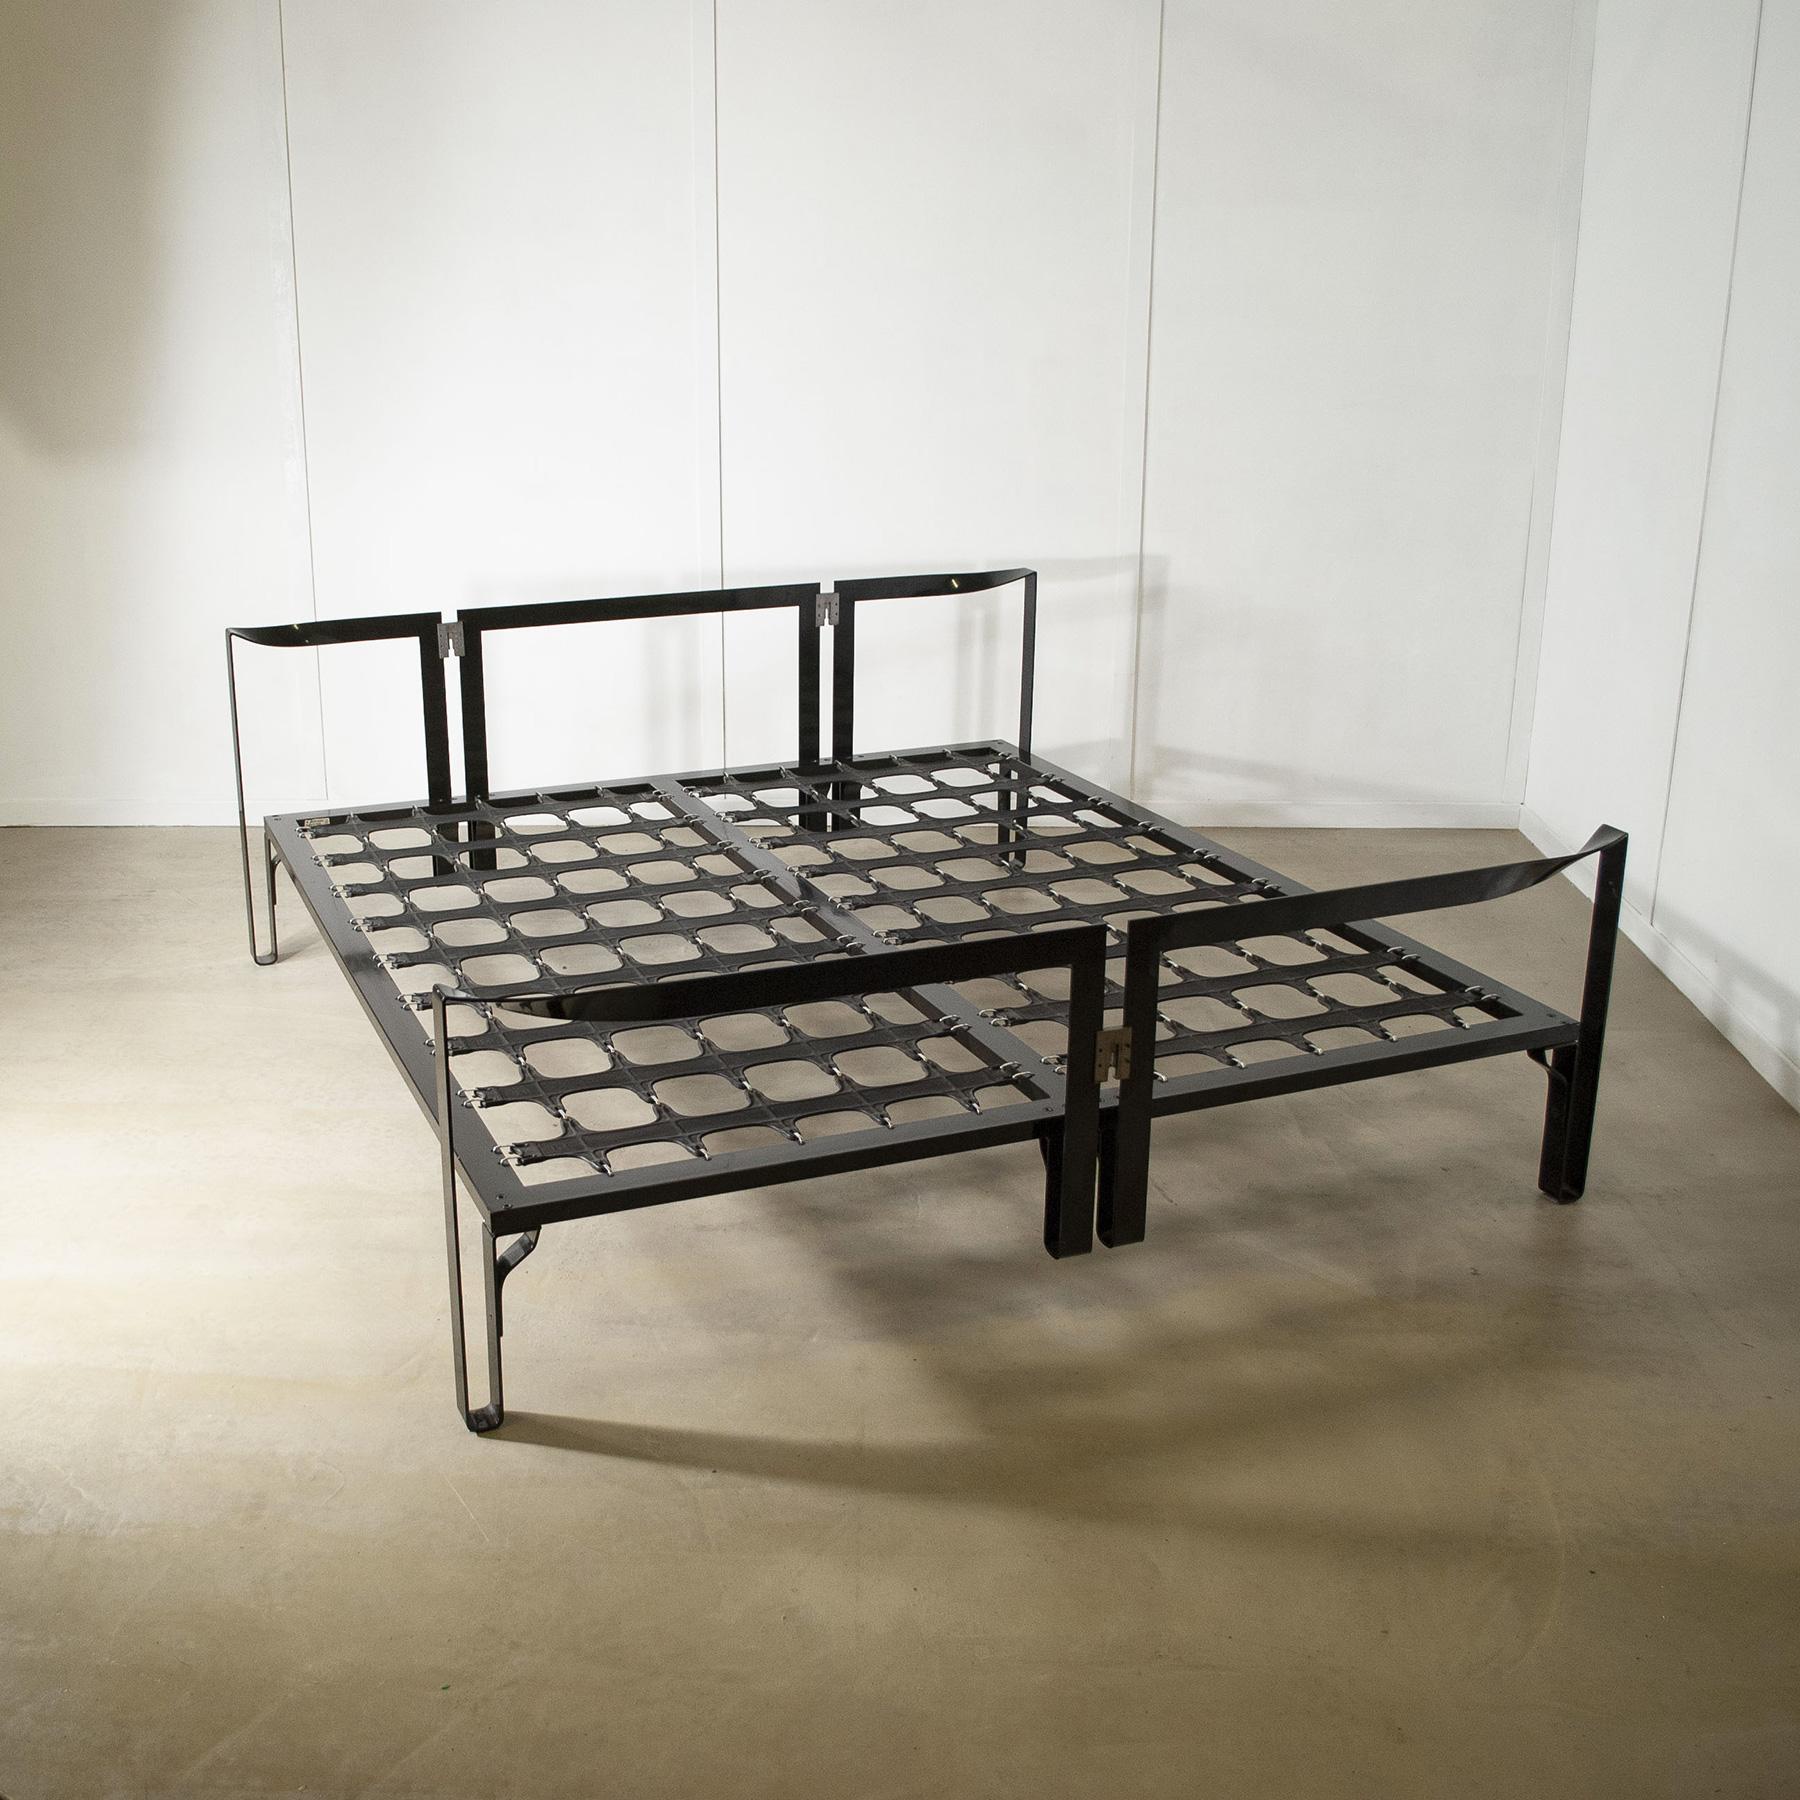 Curved black lacquered metal double bed with original slat system model Vanessa designer Tobia Scarpa for Gavina.
mattress measurements L 170 P 193 MAX 

Carlo Scarpa worked for much of his career alongside his wife Afra Bianchin (Montebelluna, 28